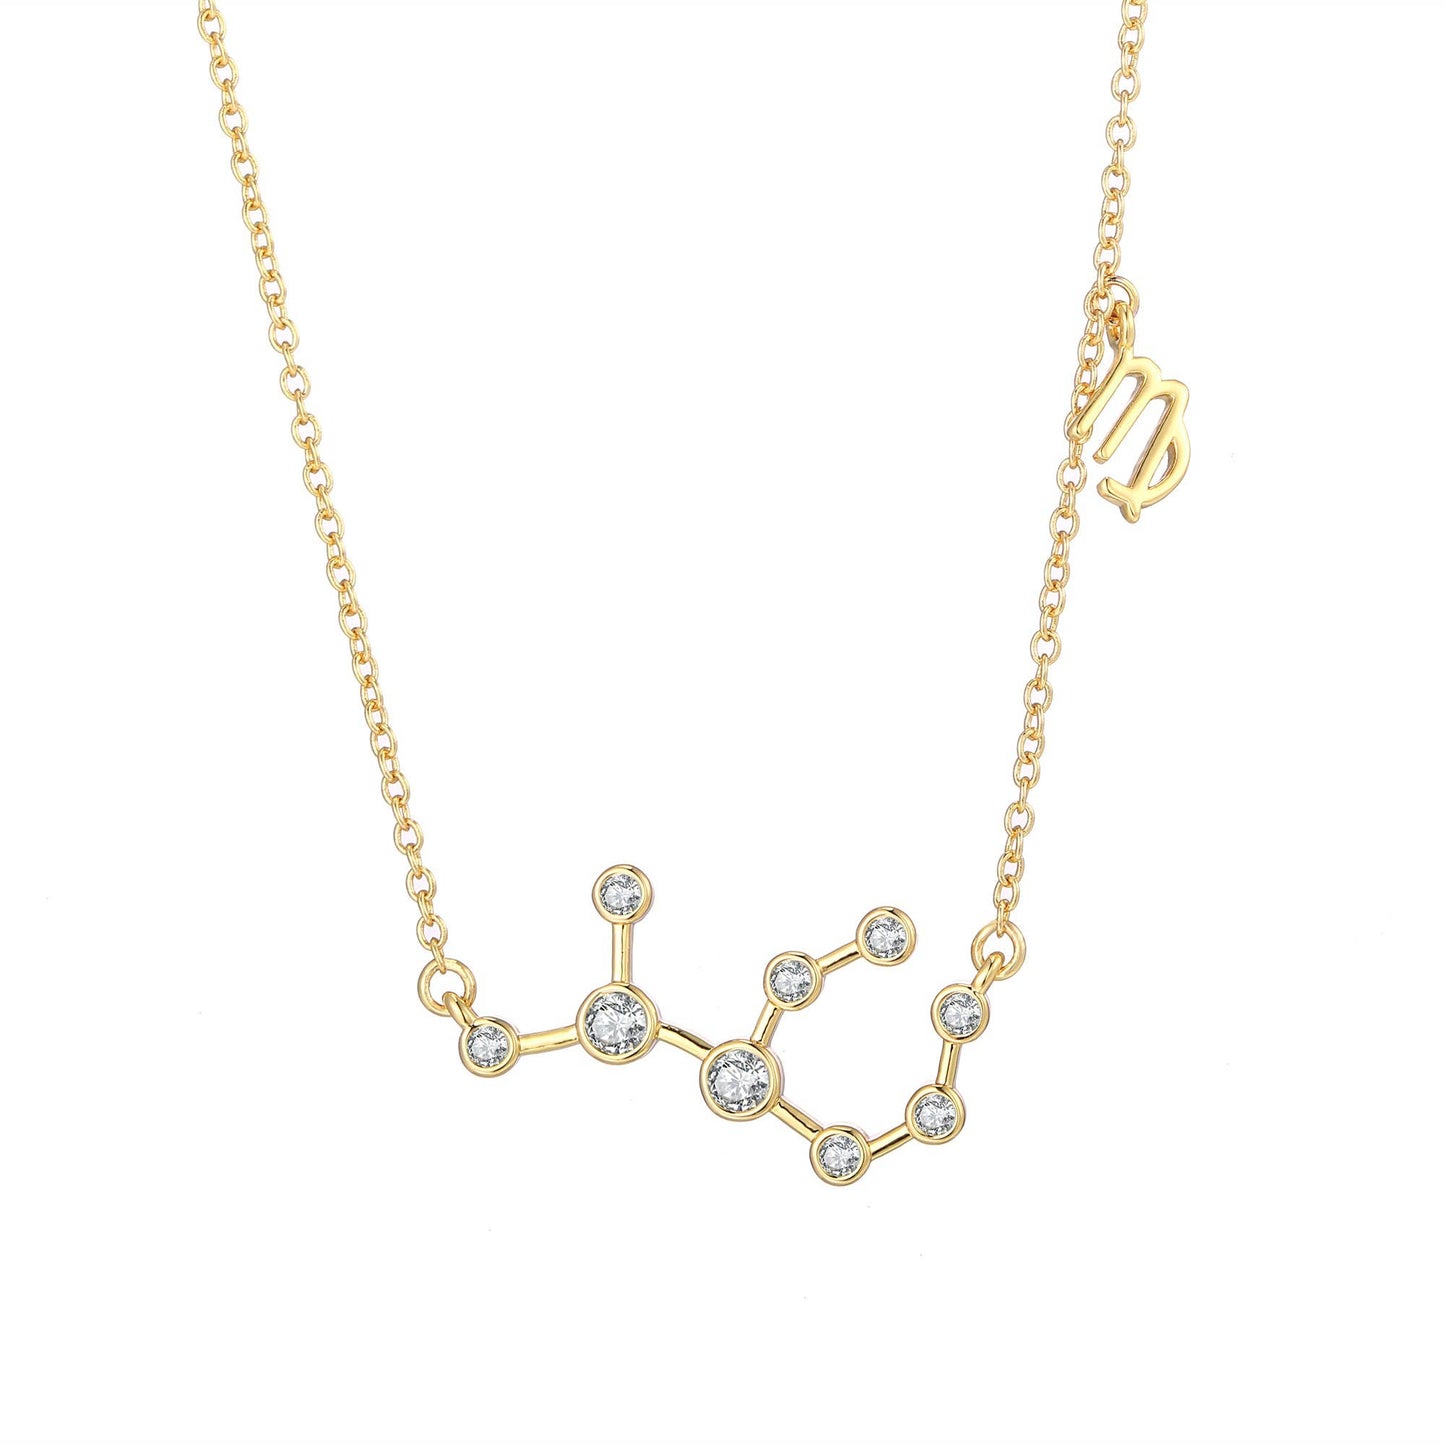 18K Gold Plated Zodiac Constellation Necklace